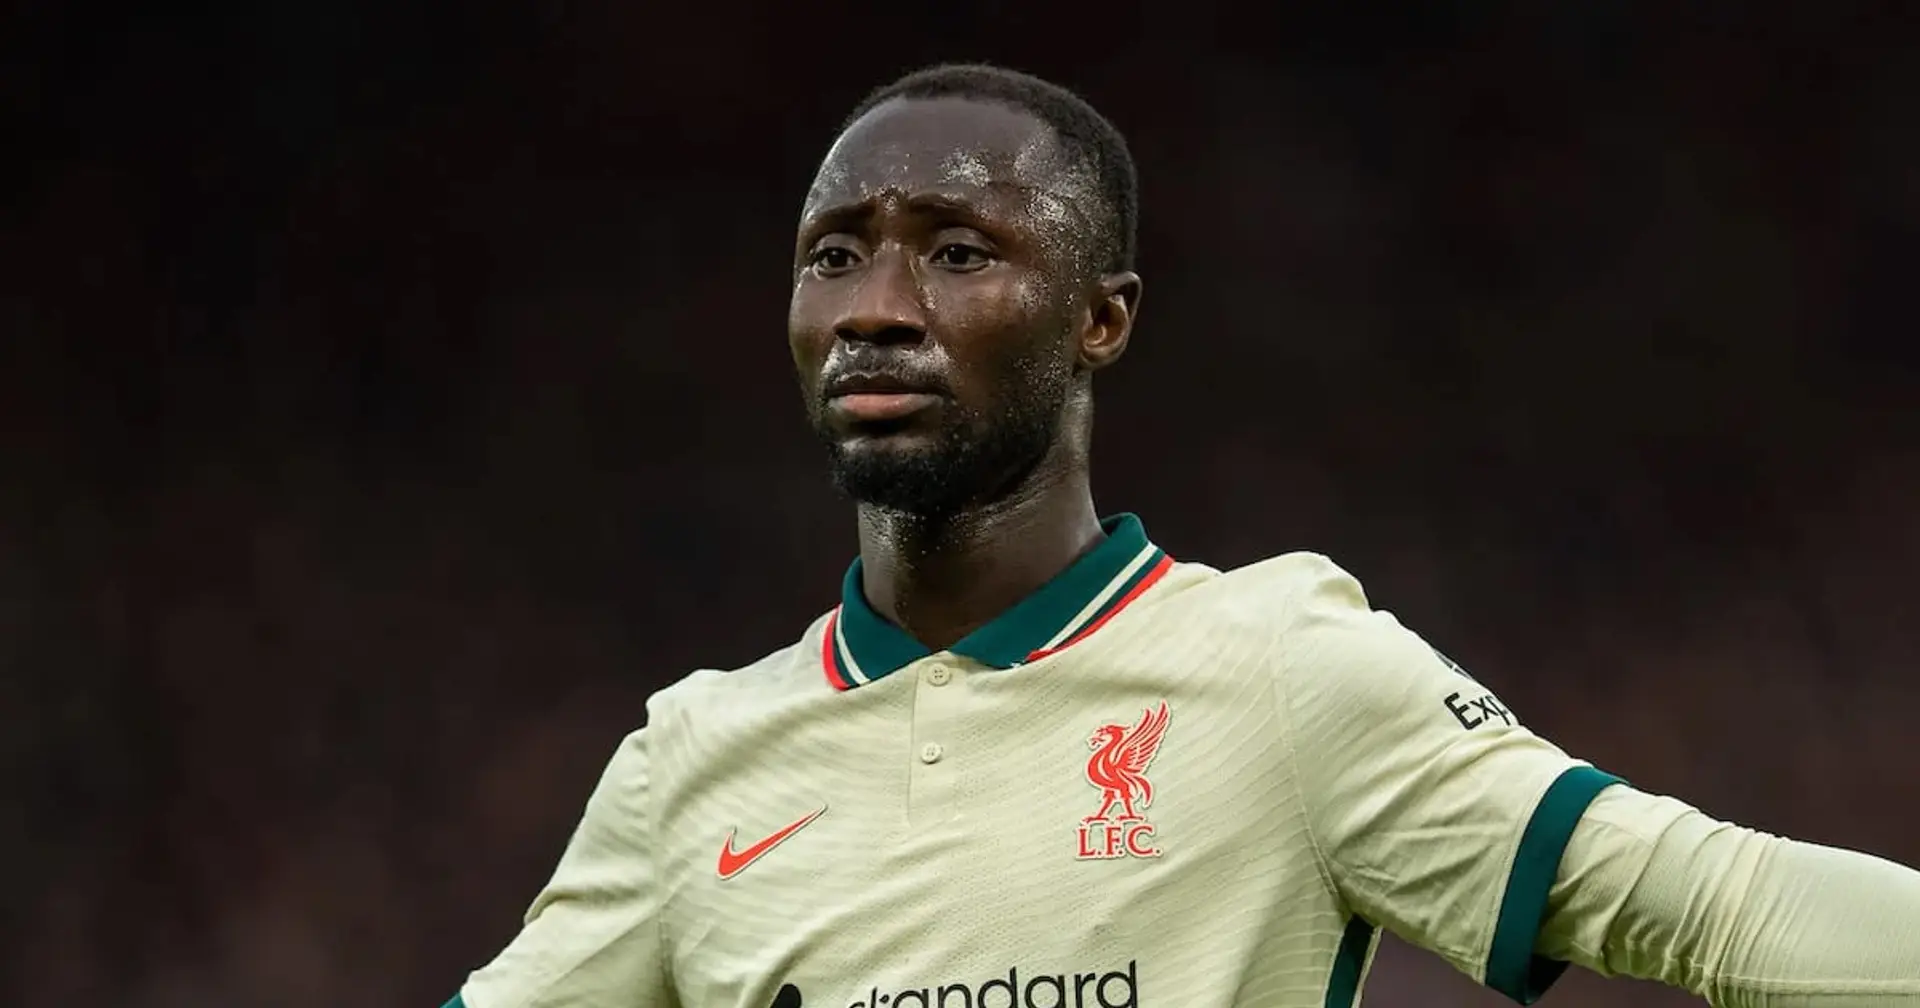 Naby Keita gets international call-up despite injury - Guinea already eliminated from World Cup qualification race